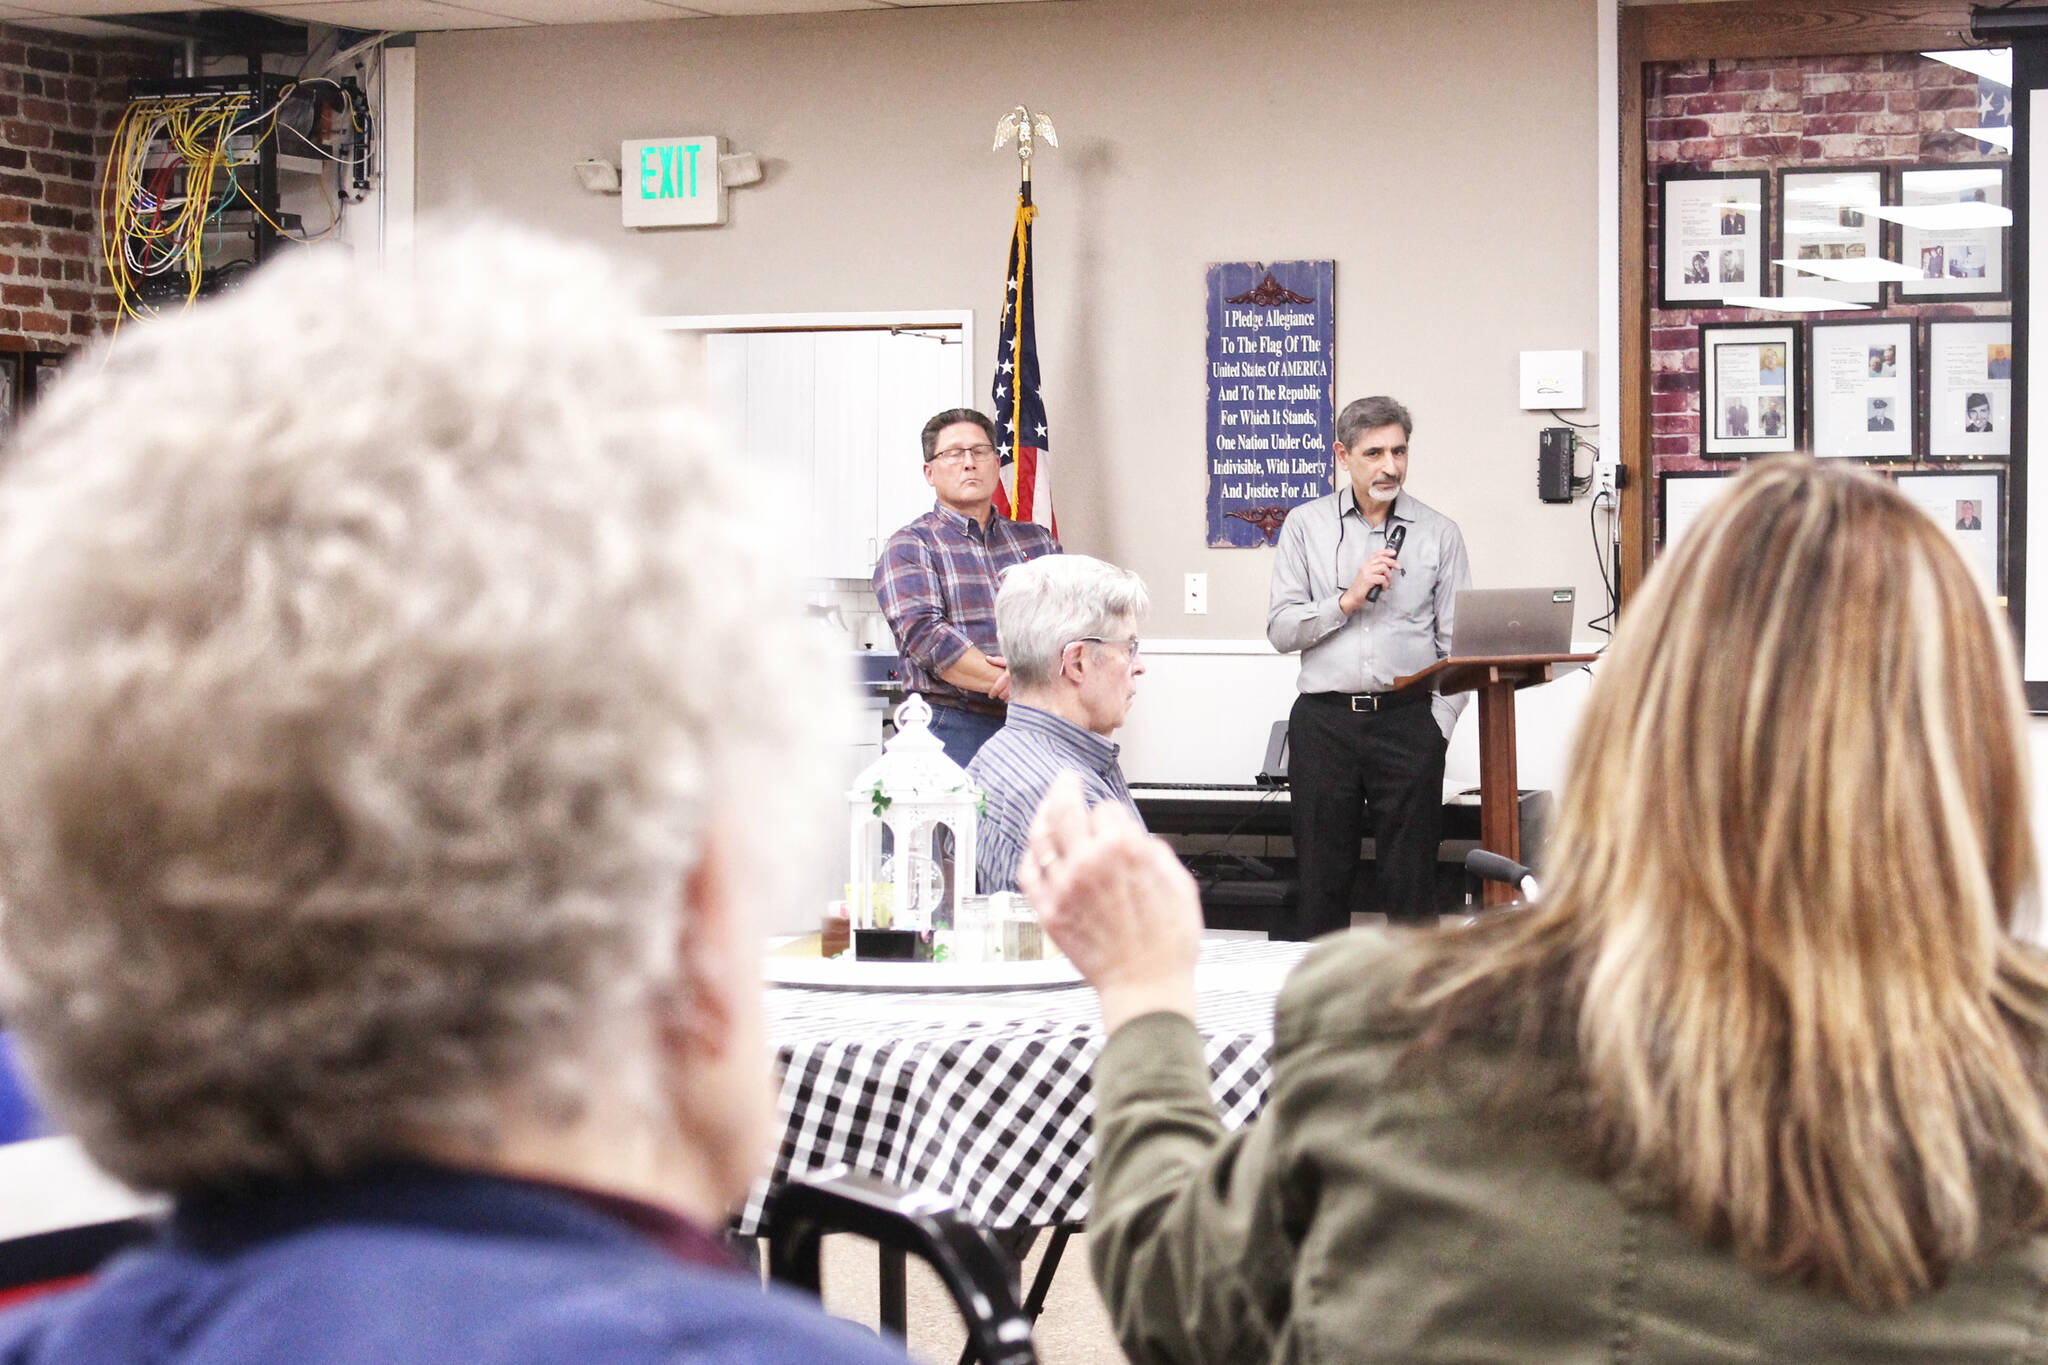 Enumclaw Mayor Jan Molinaro, other city staff members and city councilmembers fielded questions about the proposed community center during a March 14 open house. Photo by Ray Miller-Still